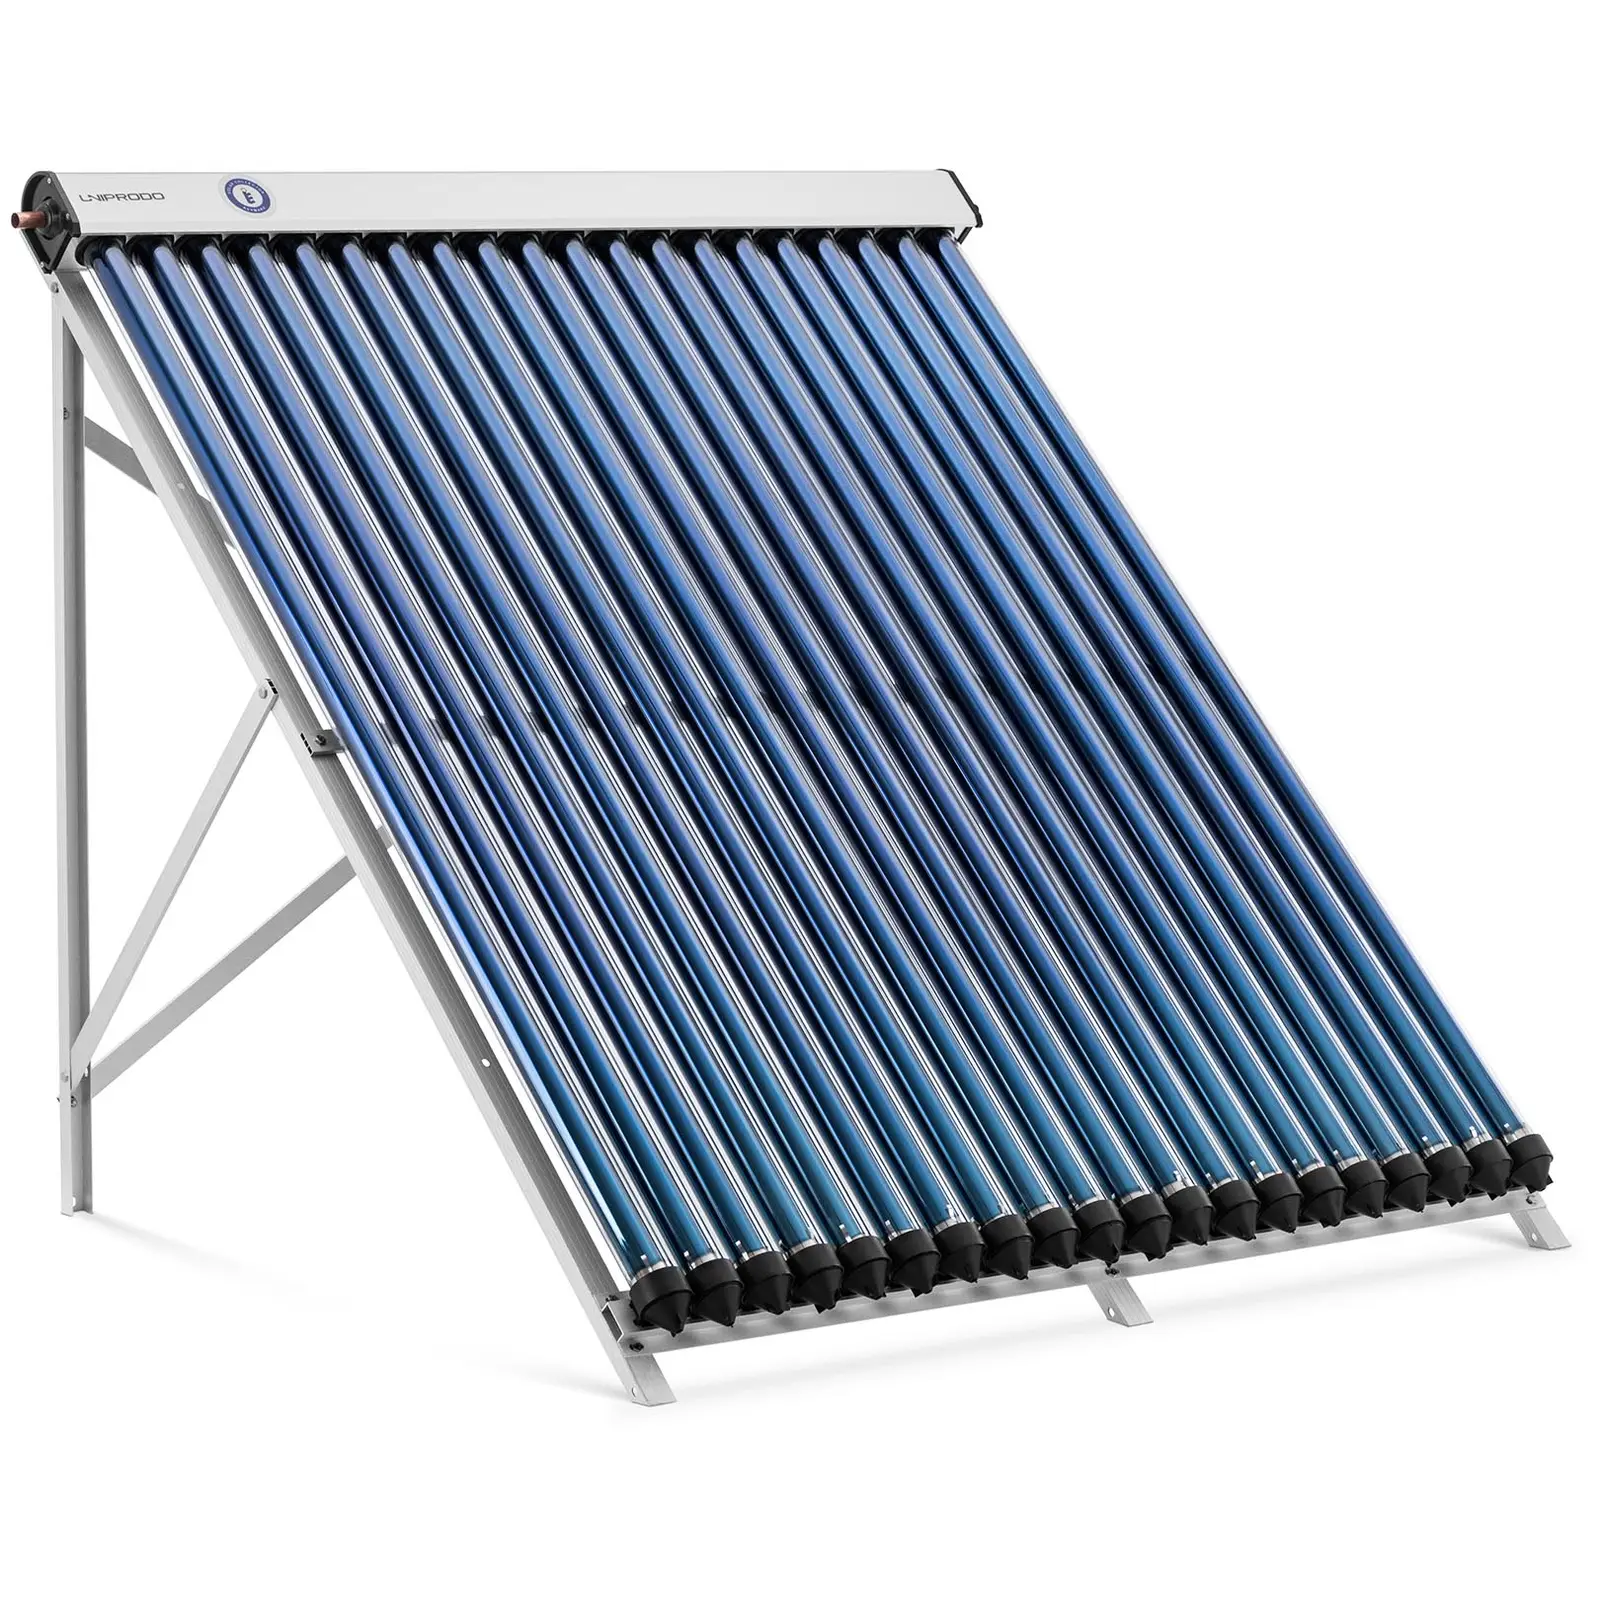 Evacuated Solar Tube Collector - Solar thermal - 20 Tubes - 160 - 200 L - 1.6 m² - -45 - 90 °C